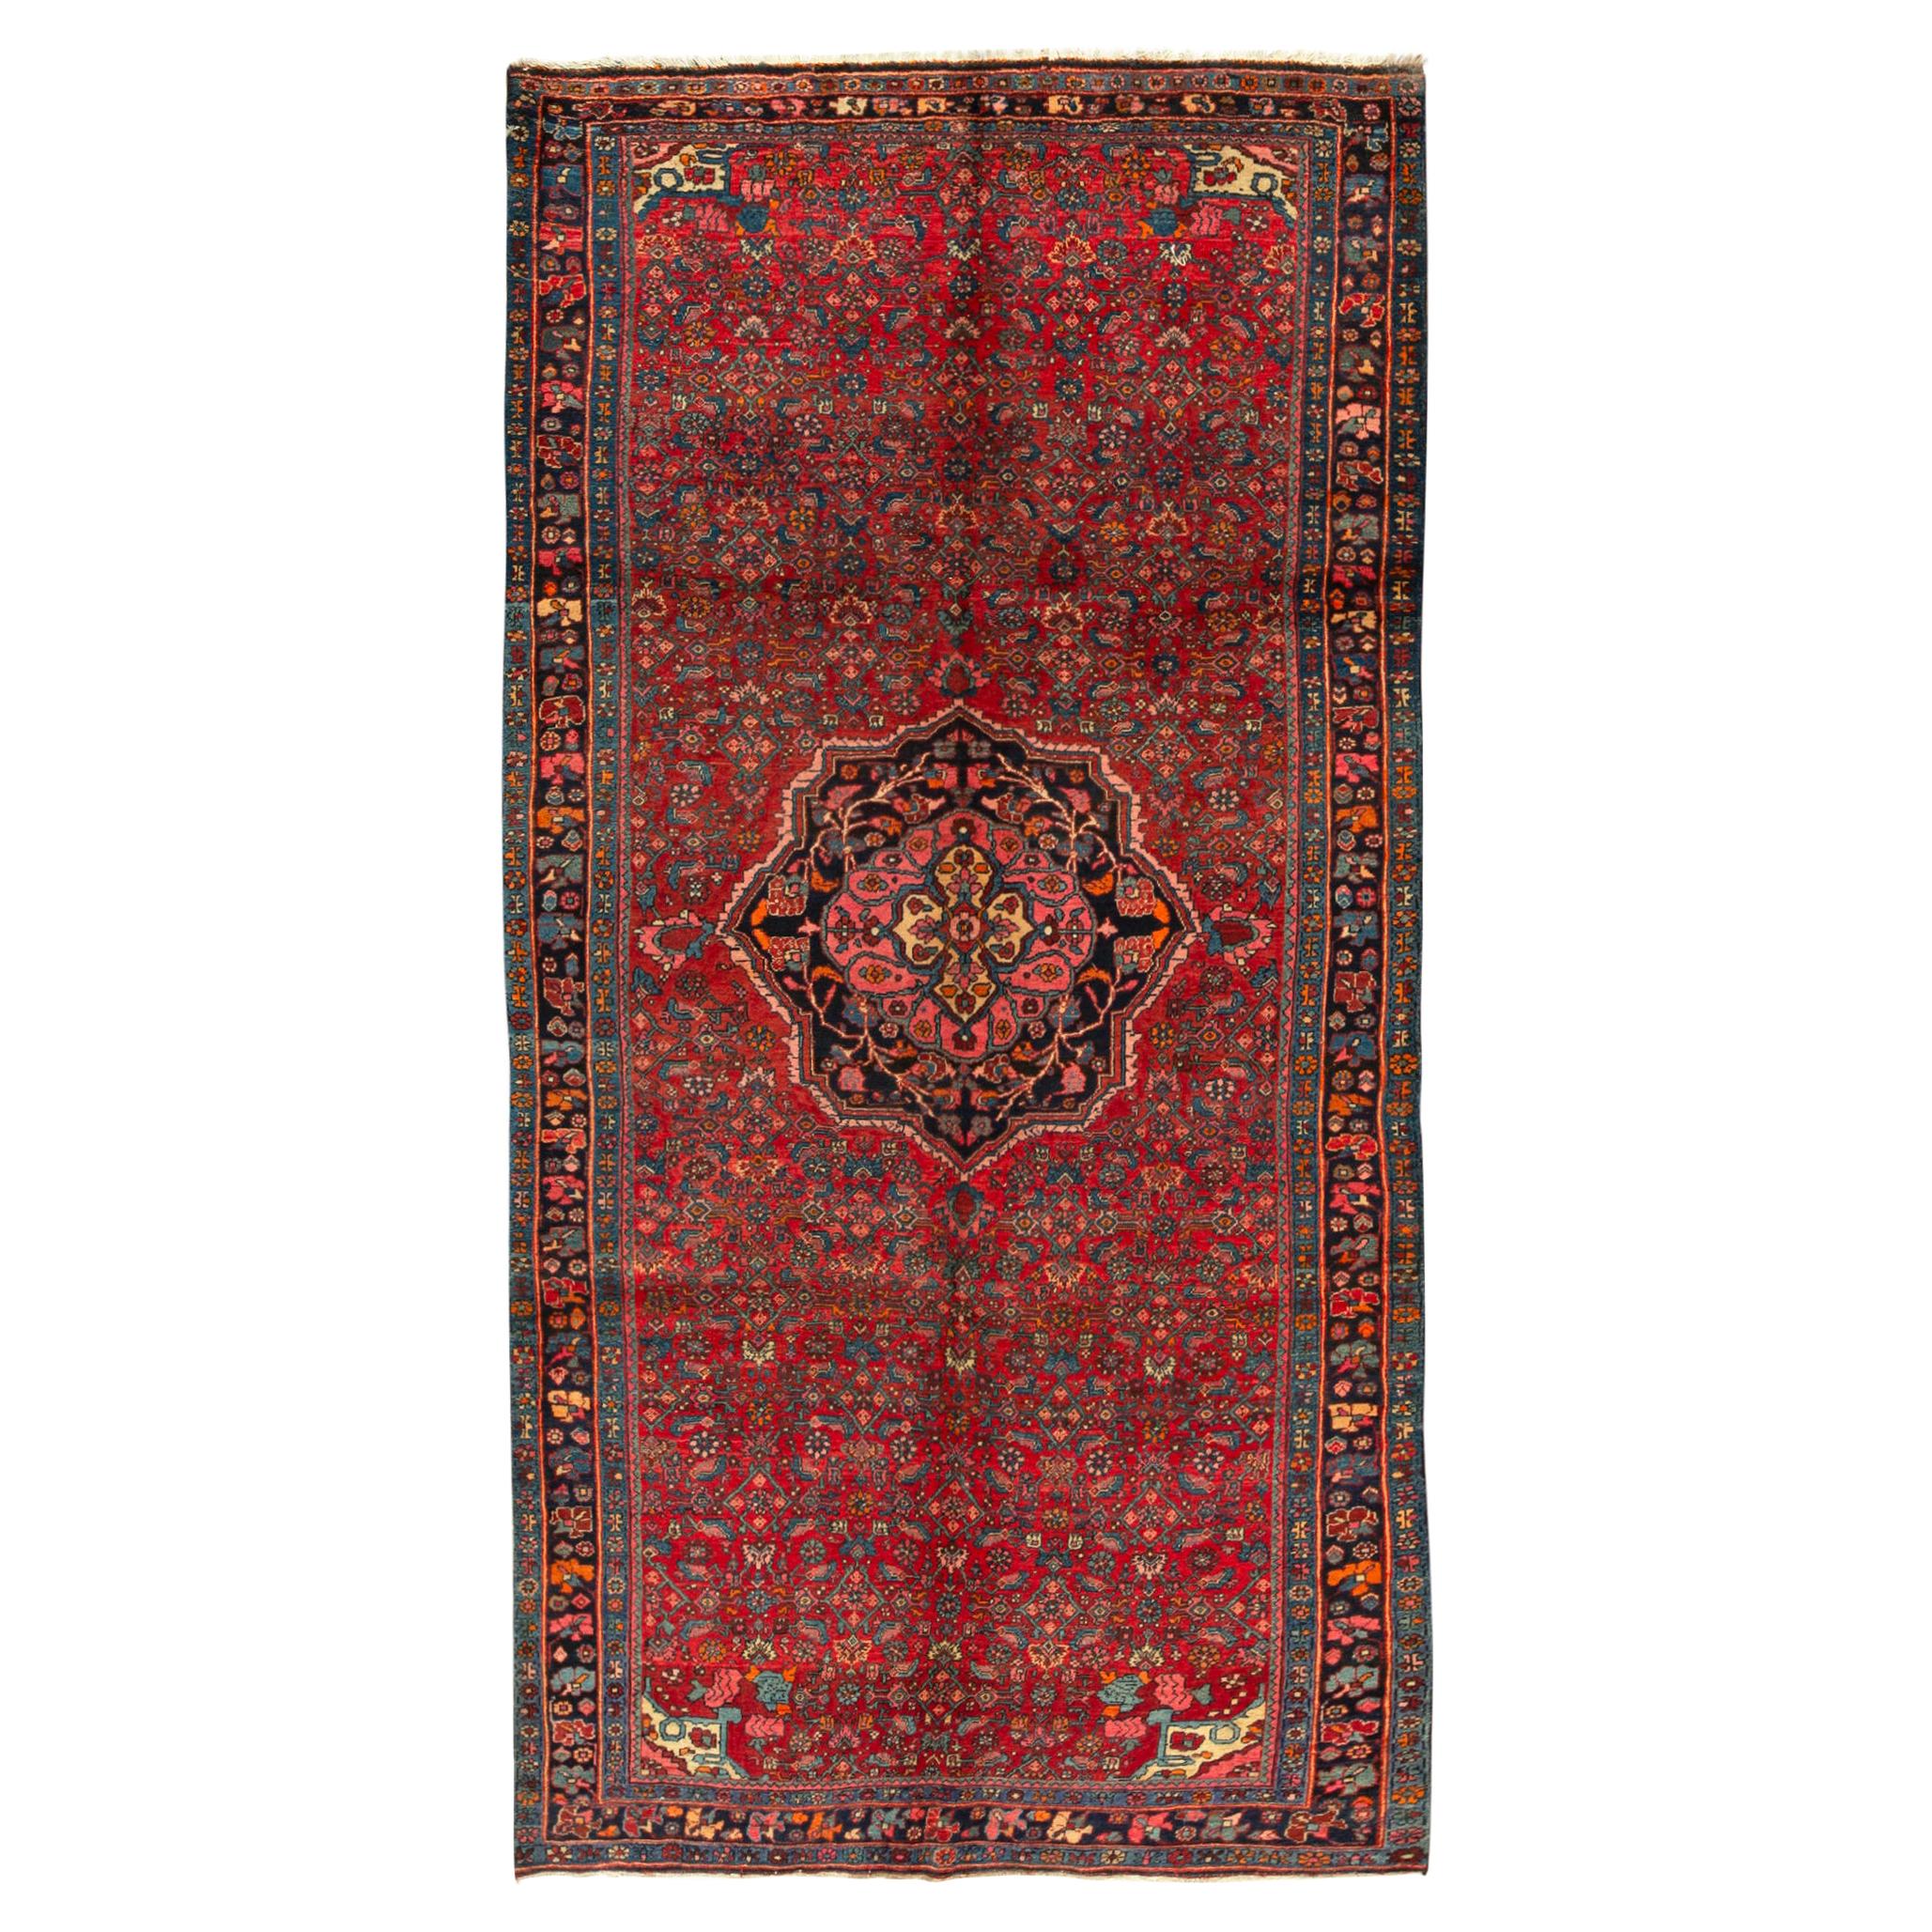  Antique Persian fine Traditional Handwoven Luxury Wool Red / Navy Rug